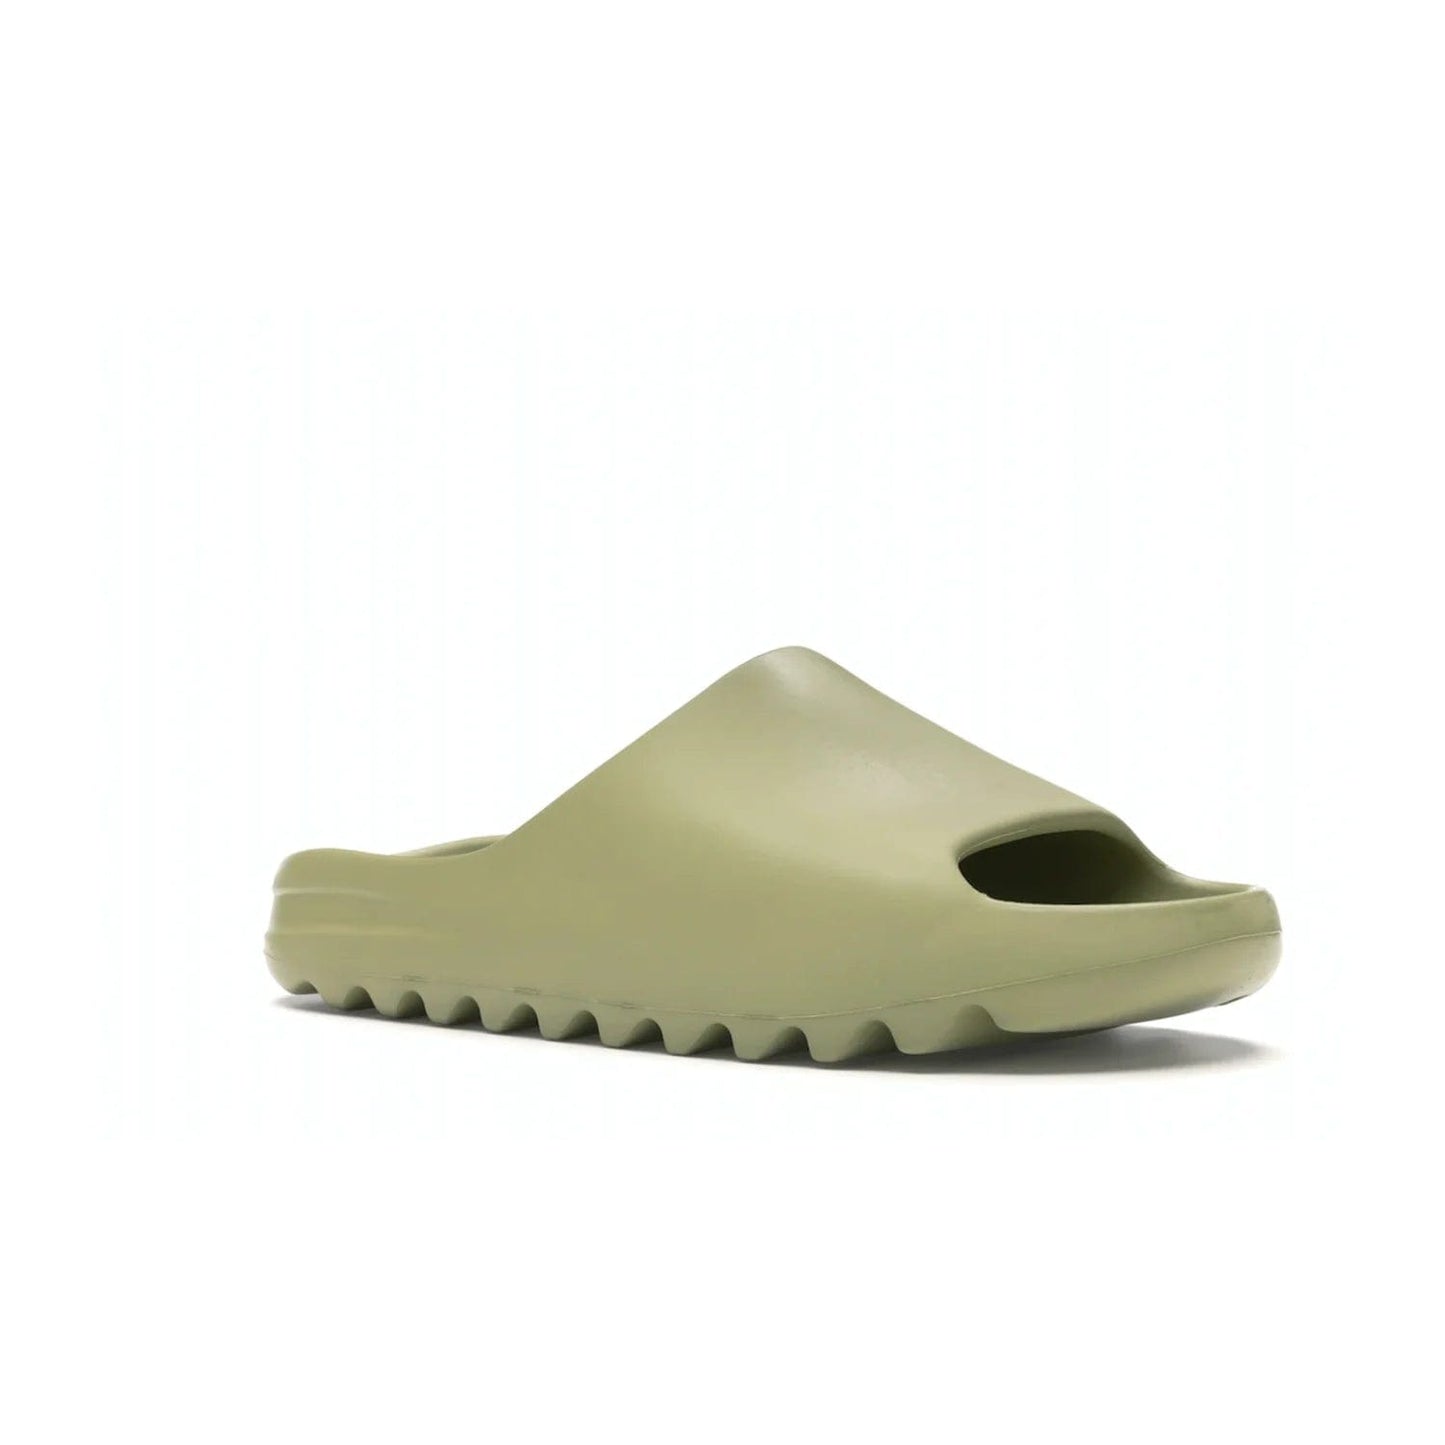 adidas Yeezy Slide Resin (2019/2021) - Image 5 - Only at www.BallersClubKickz.com - Step into fashion and function with the adidas Yeezy Slide Resin. Featuring a lightweight Resin EVA foam construction and an outsole with accentuated grooves for traction and support. The latest release is available in a Resin/Resin/Resin colorway, combining modern aesthetics and classic style. Step into style with the adidas Yeezy Slide Resin and be the trend-setter this season.